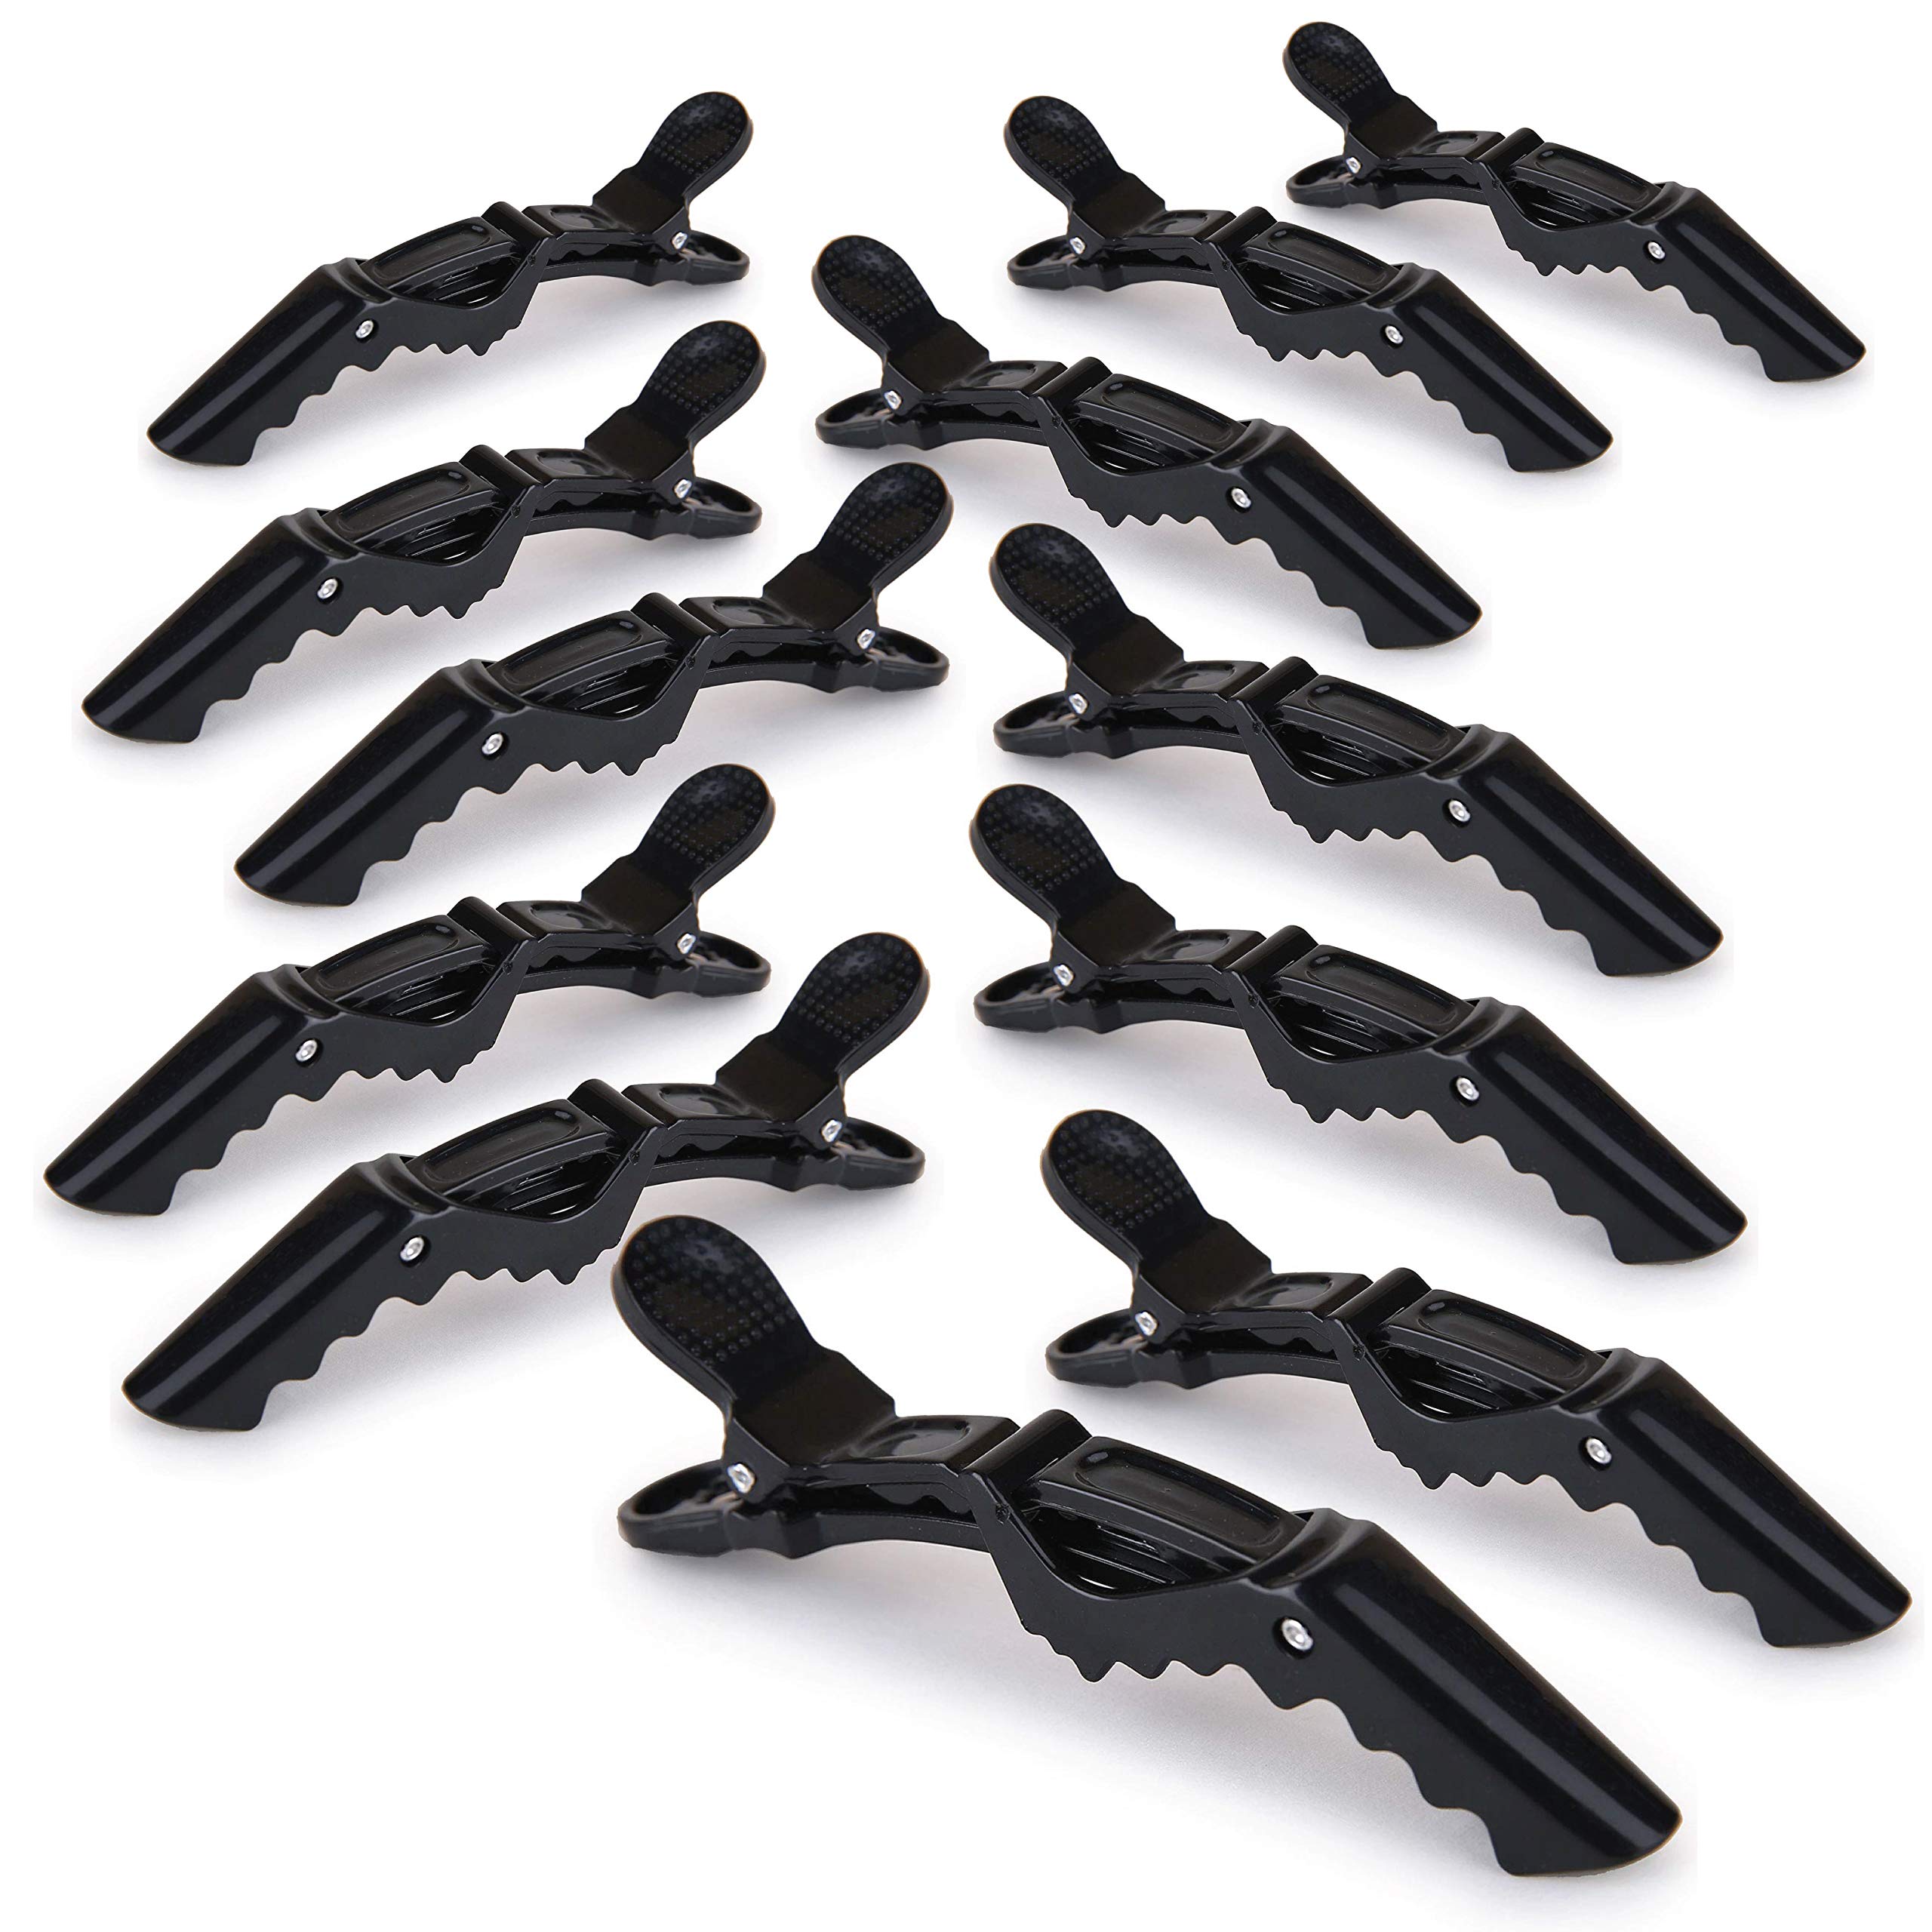 Deke Home Women styling hairclip - 12 pcs professional alligator plastic  hair sectioning clips - Durable alligator hair